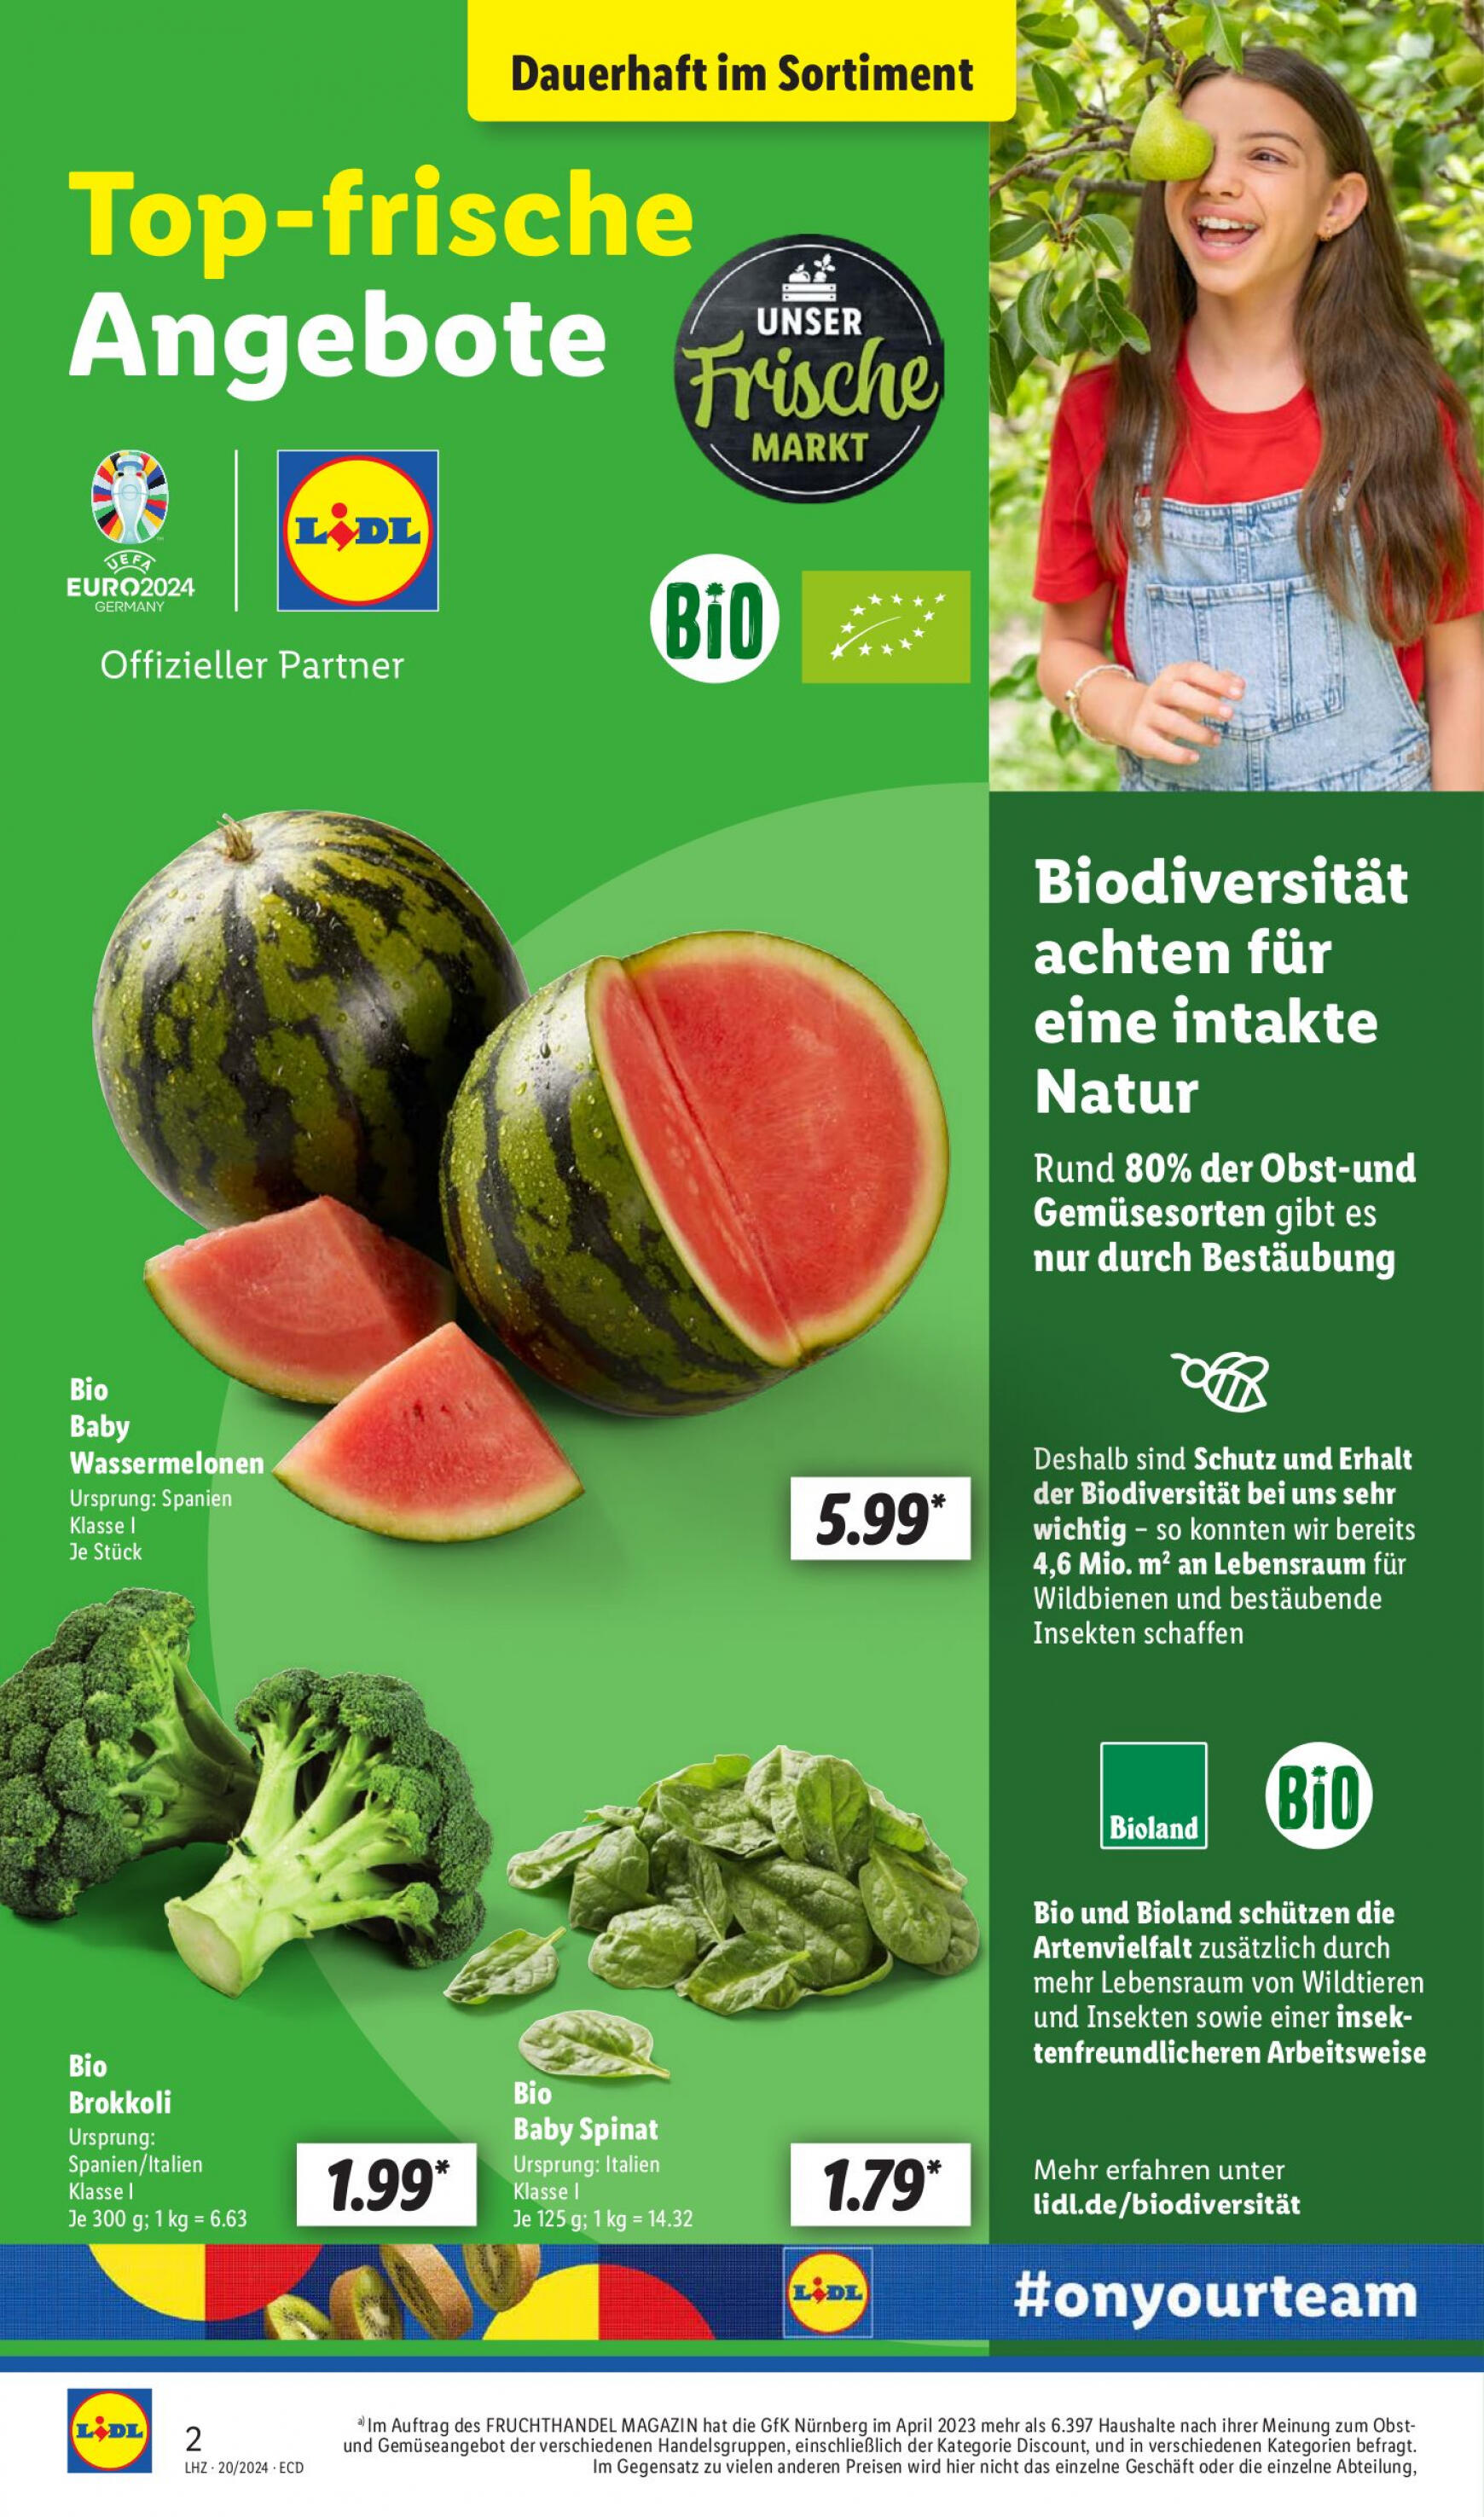 lidl - Flyer Lidl aktuell 13.05. - 18.05. - page: 2